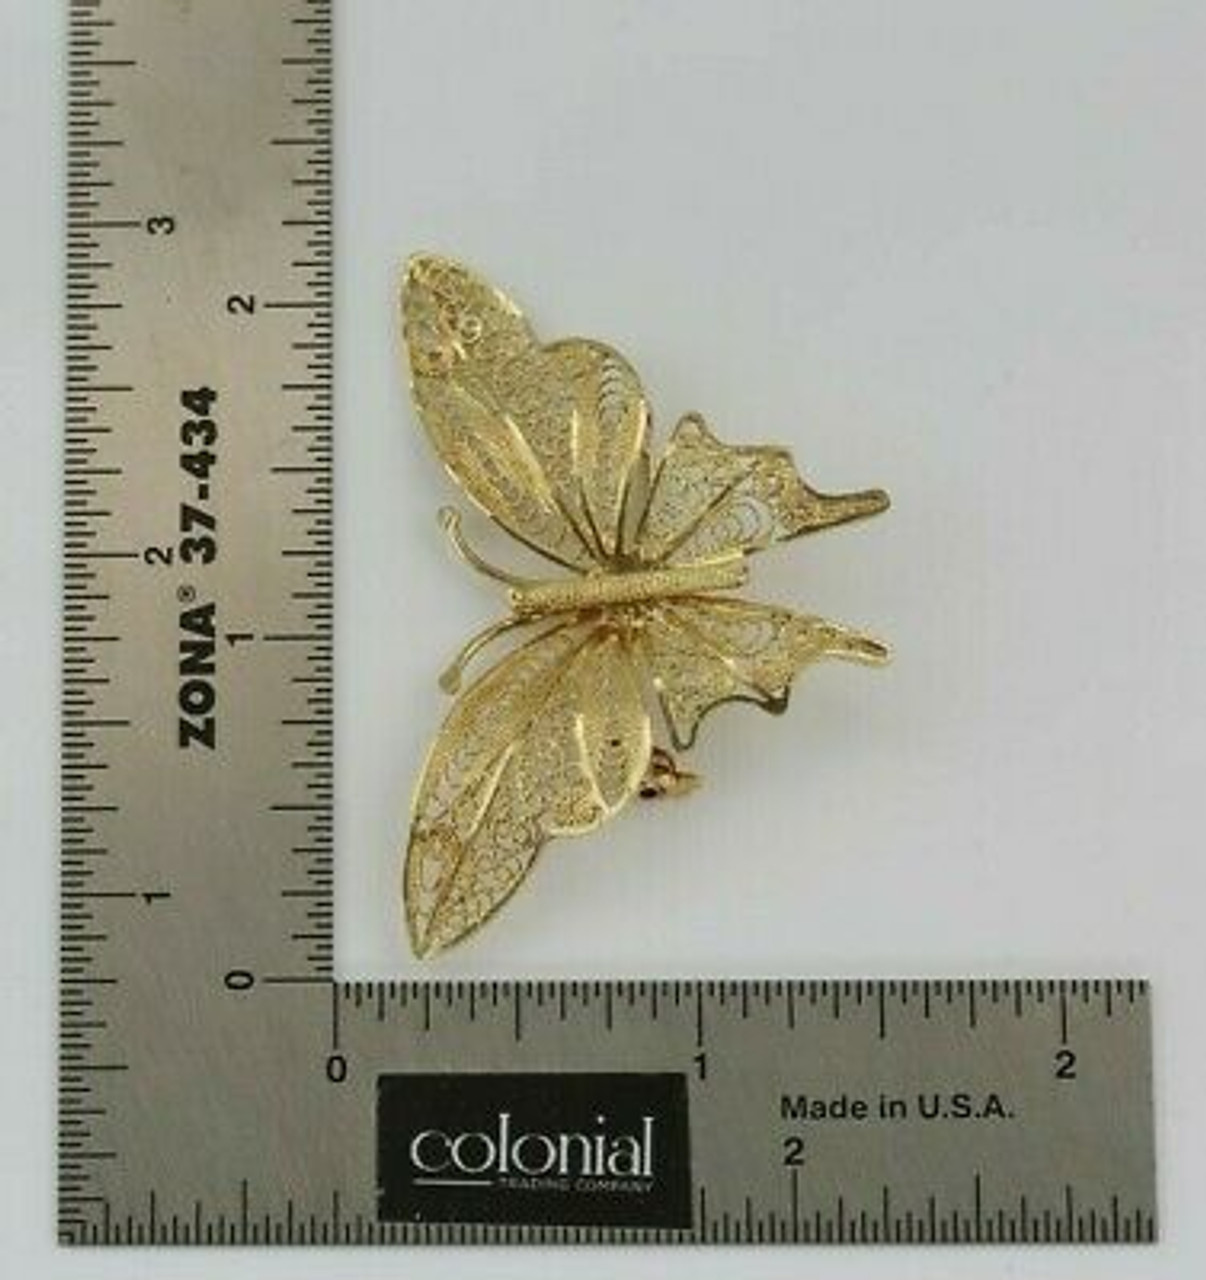 14K Yellow Gold Filigree Butterfly Pin Circa 1980 - Colonial Trading Company